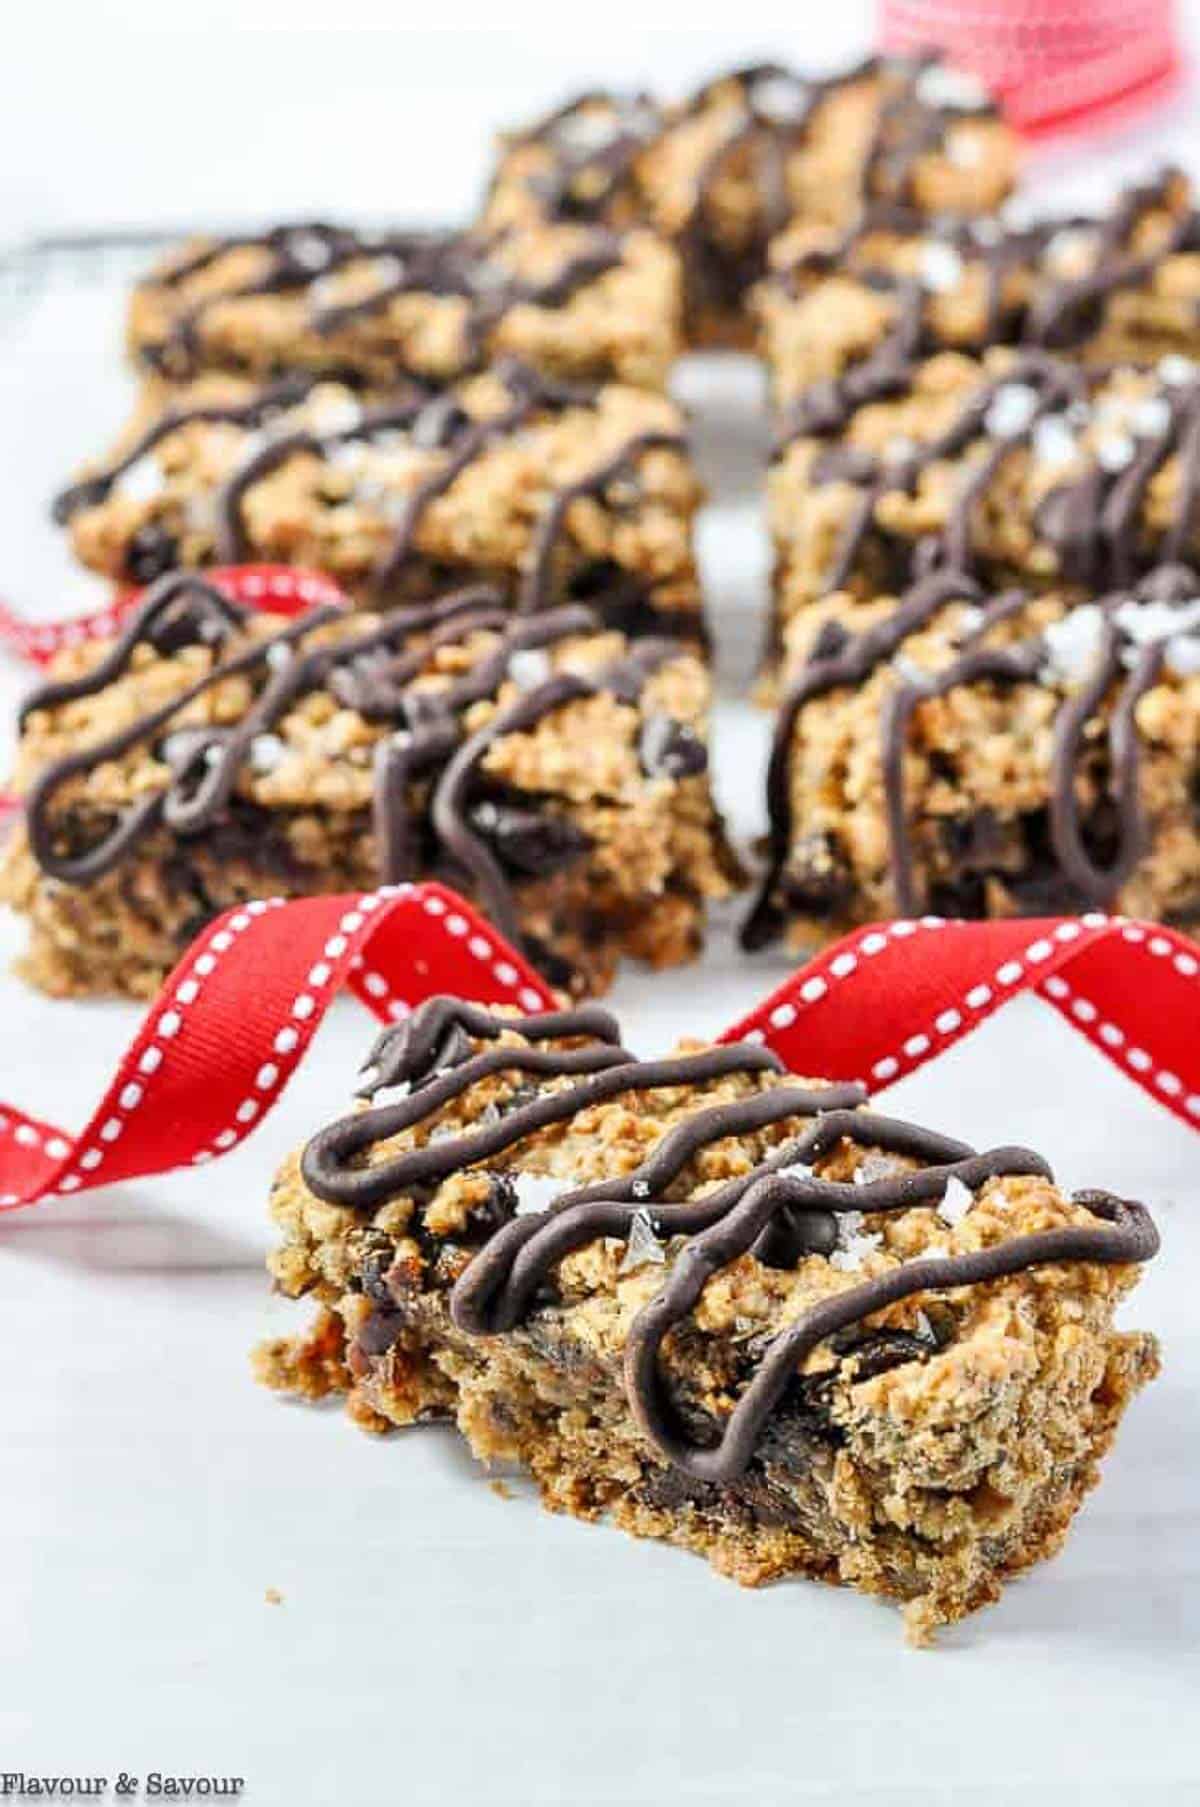 Chocolate cherry chia oatmeal bars drizzled with chocolate.